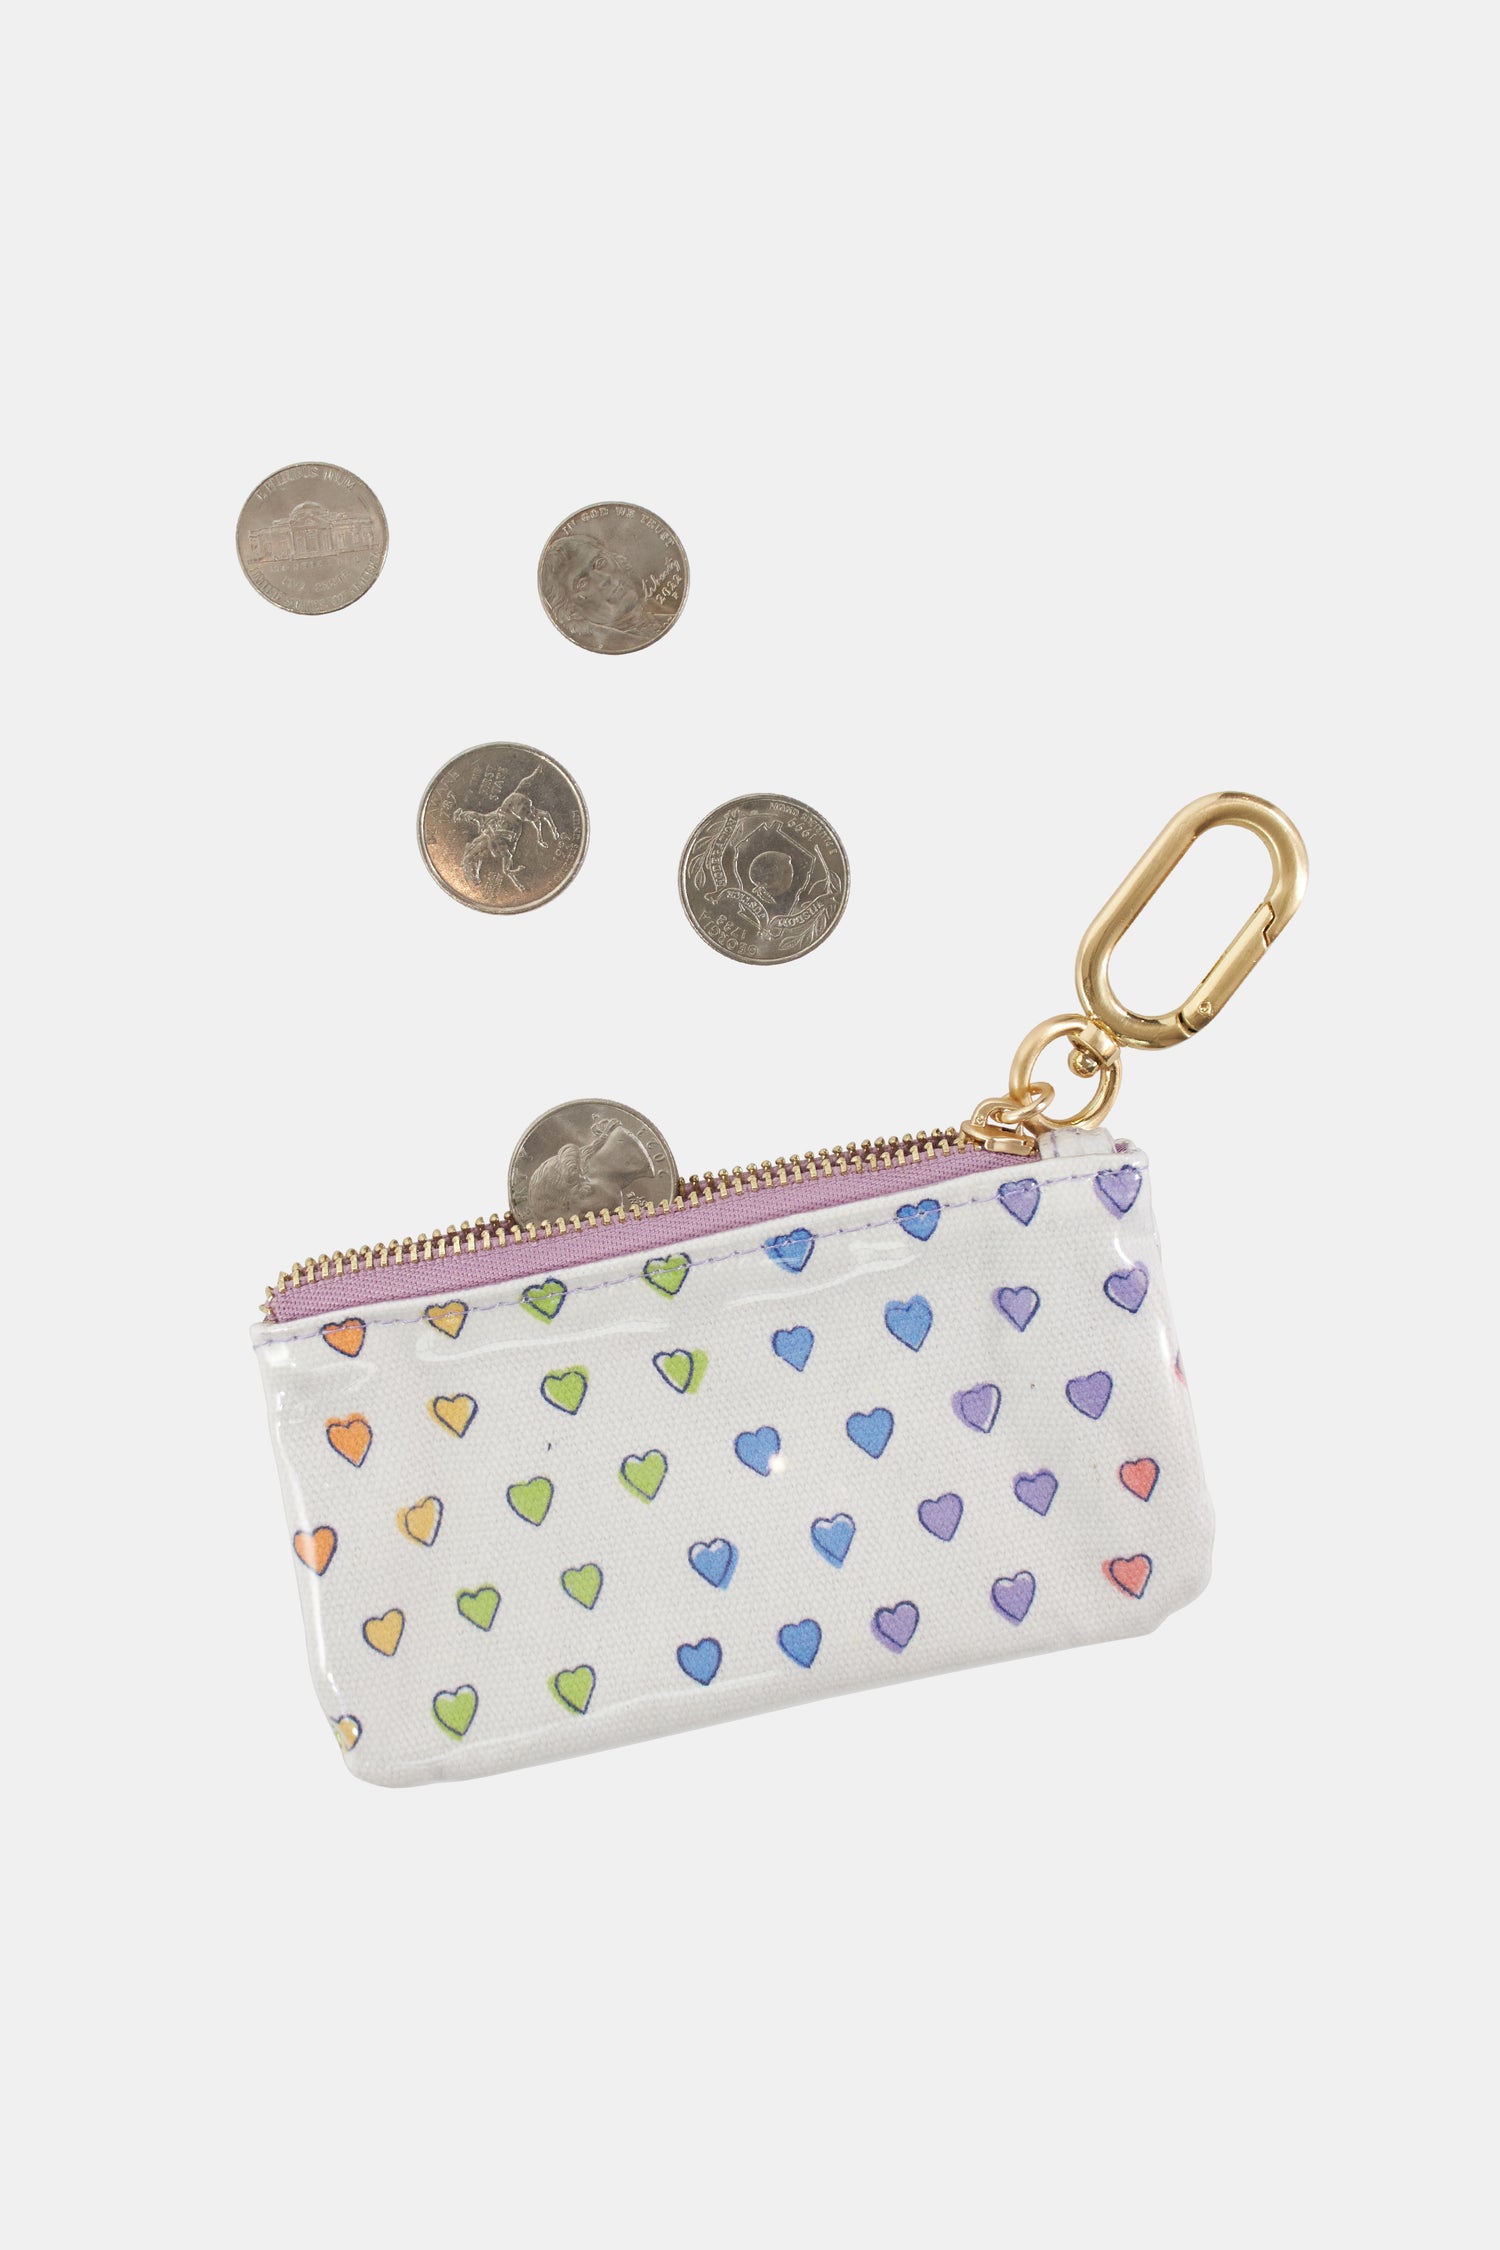 Litake Cartoon Rabbit Coin Purse Cute Zipper Silicone Wallet Small Key Card Bag  Change Purse for Women Girls Students, Pink Coin Purse Pink - Price in  India | Flipkart.com